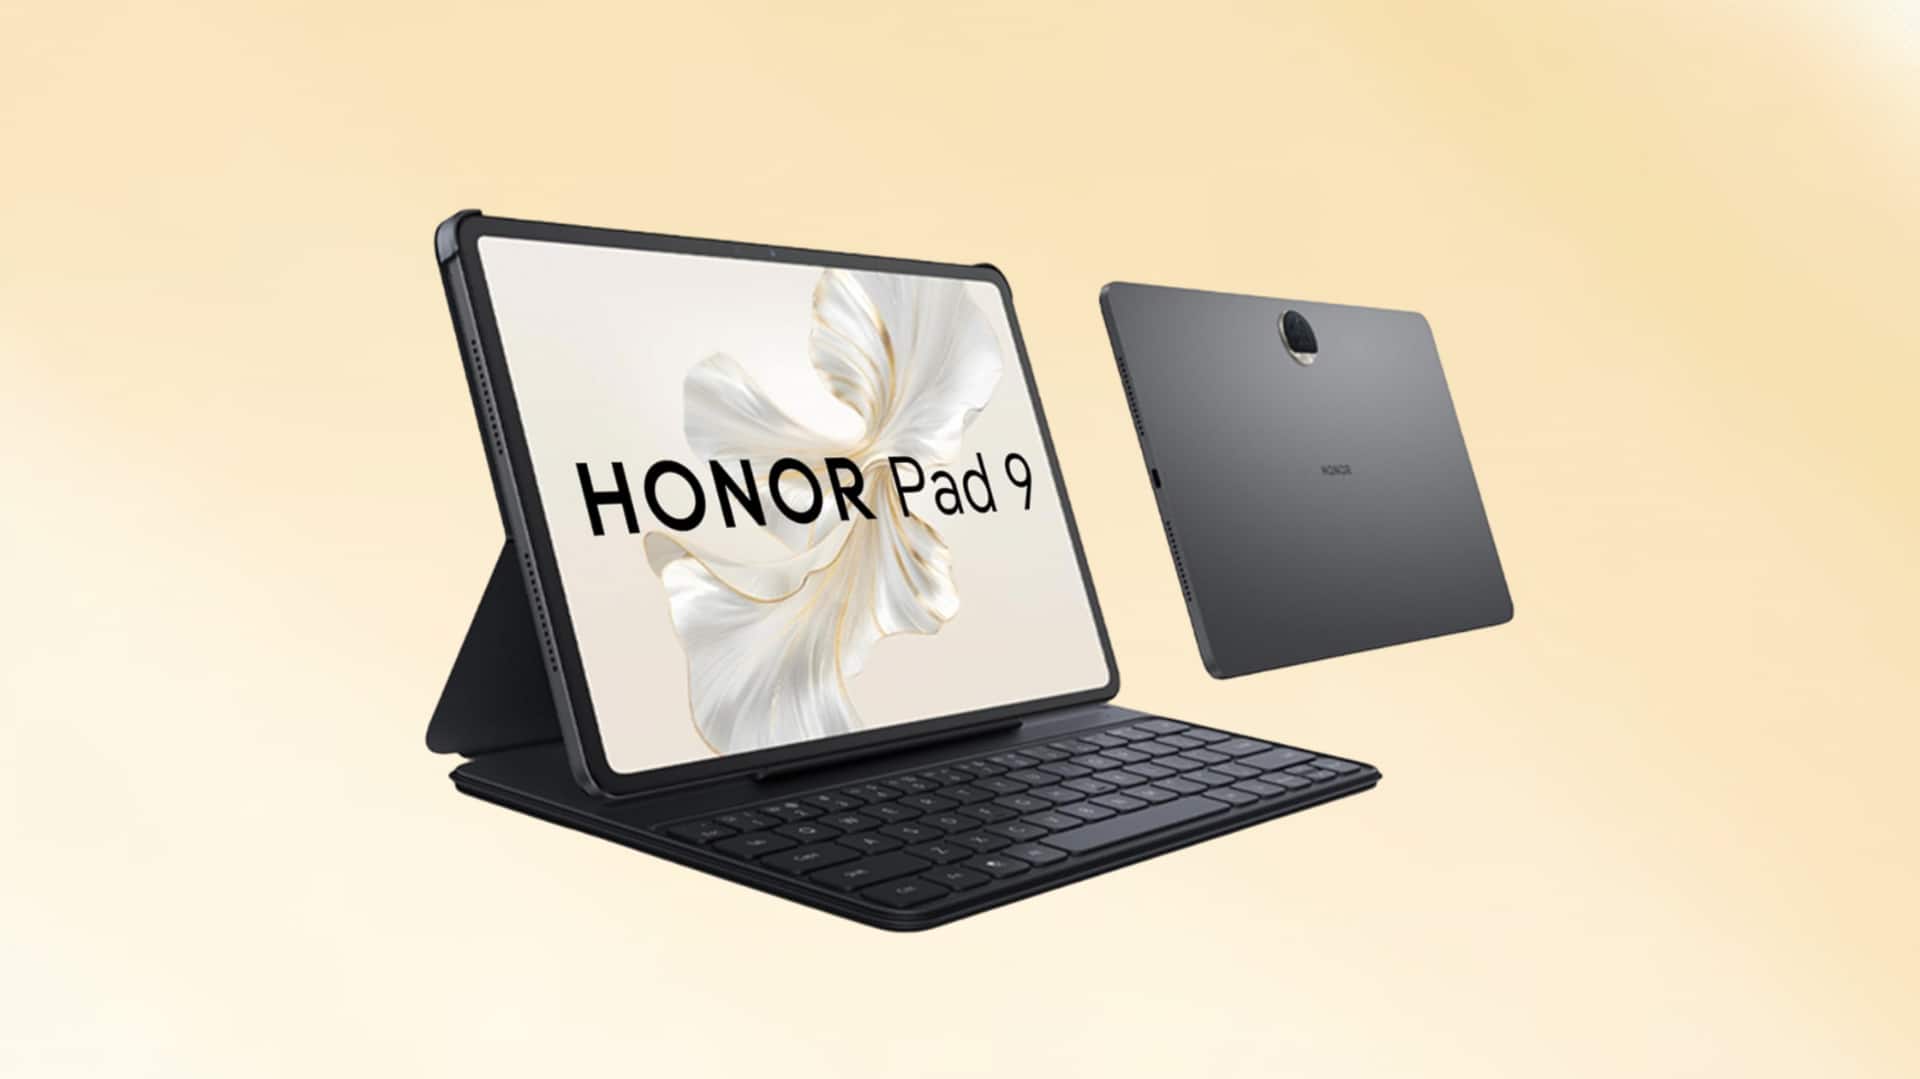 HONOR Pad 9, with eight built-in speakers, launched in India